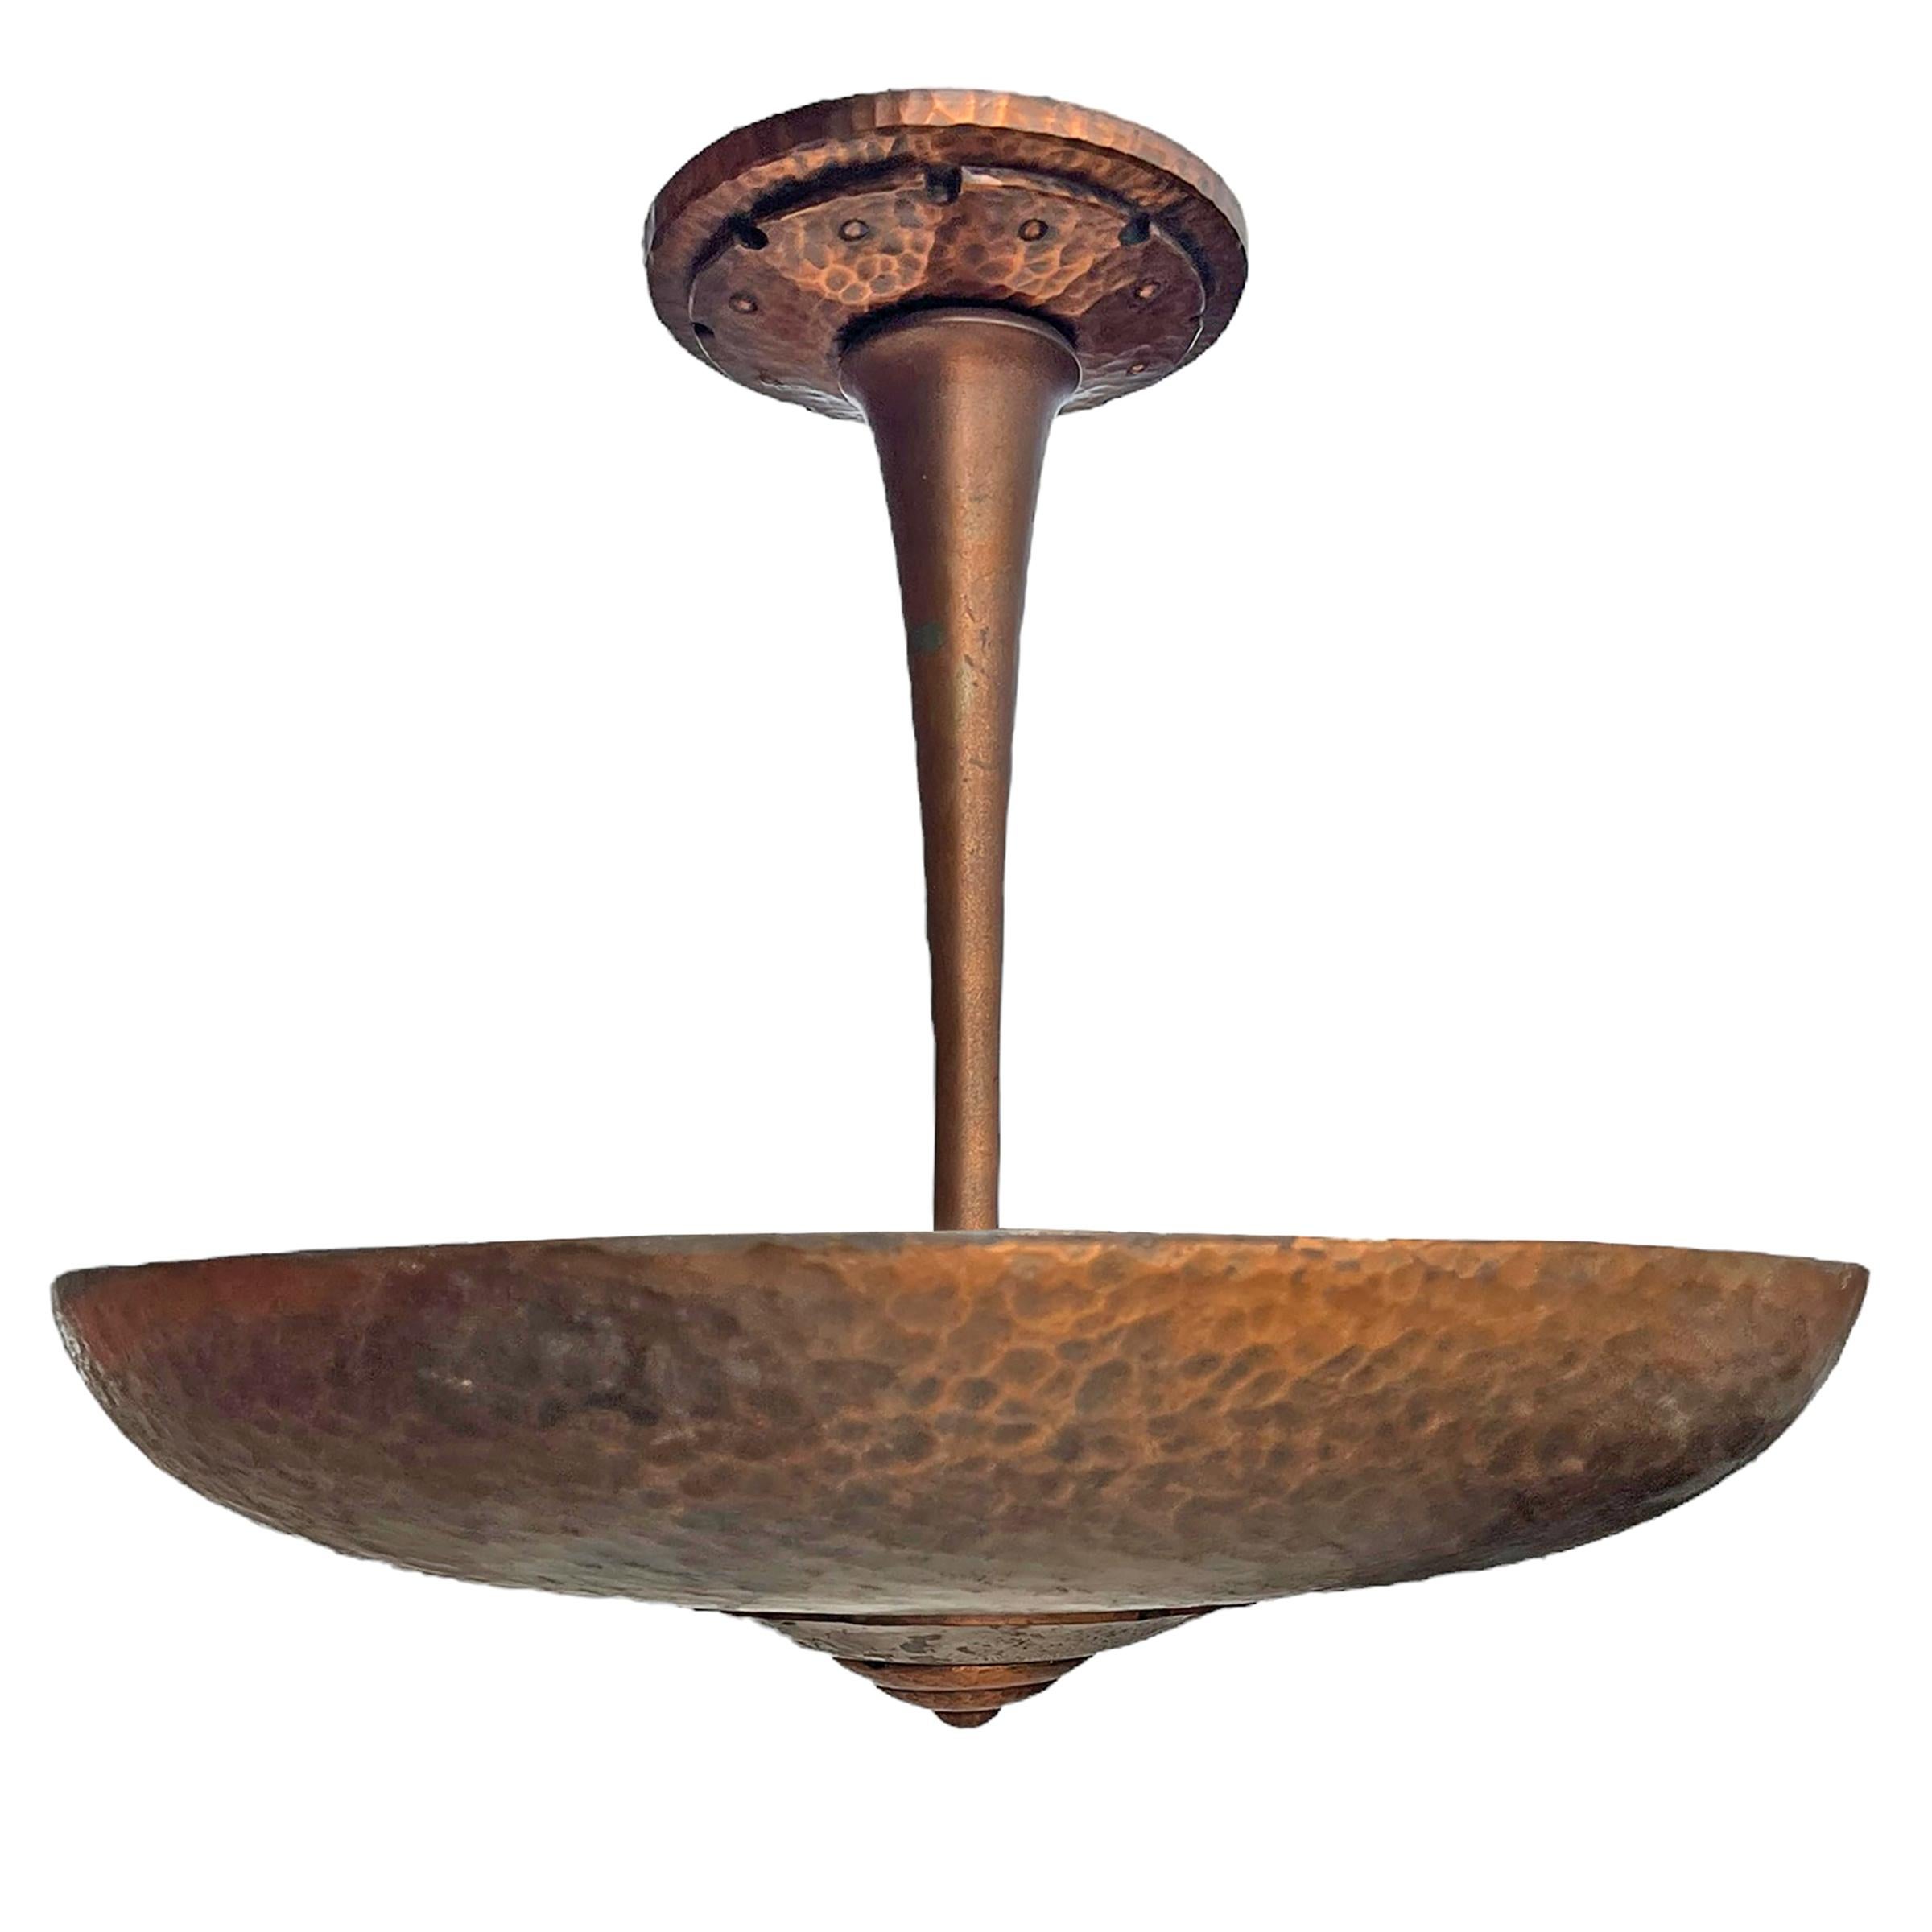 Early 20th Century American Art Deco Hammered Copper Light Fixture In Good Condition For Sale In Chicago, IL